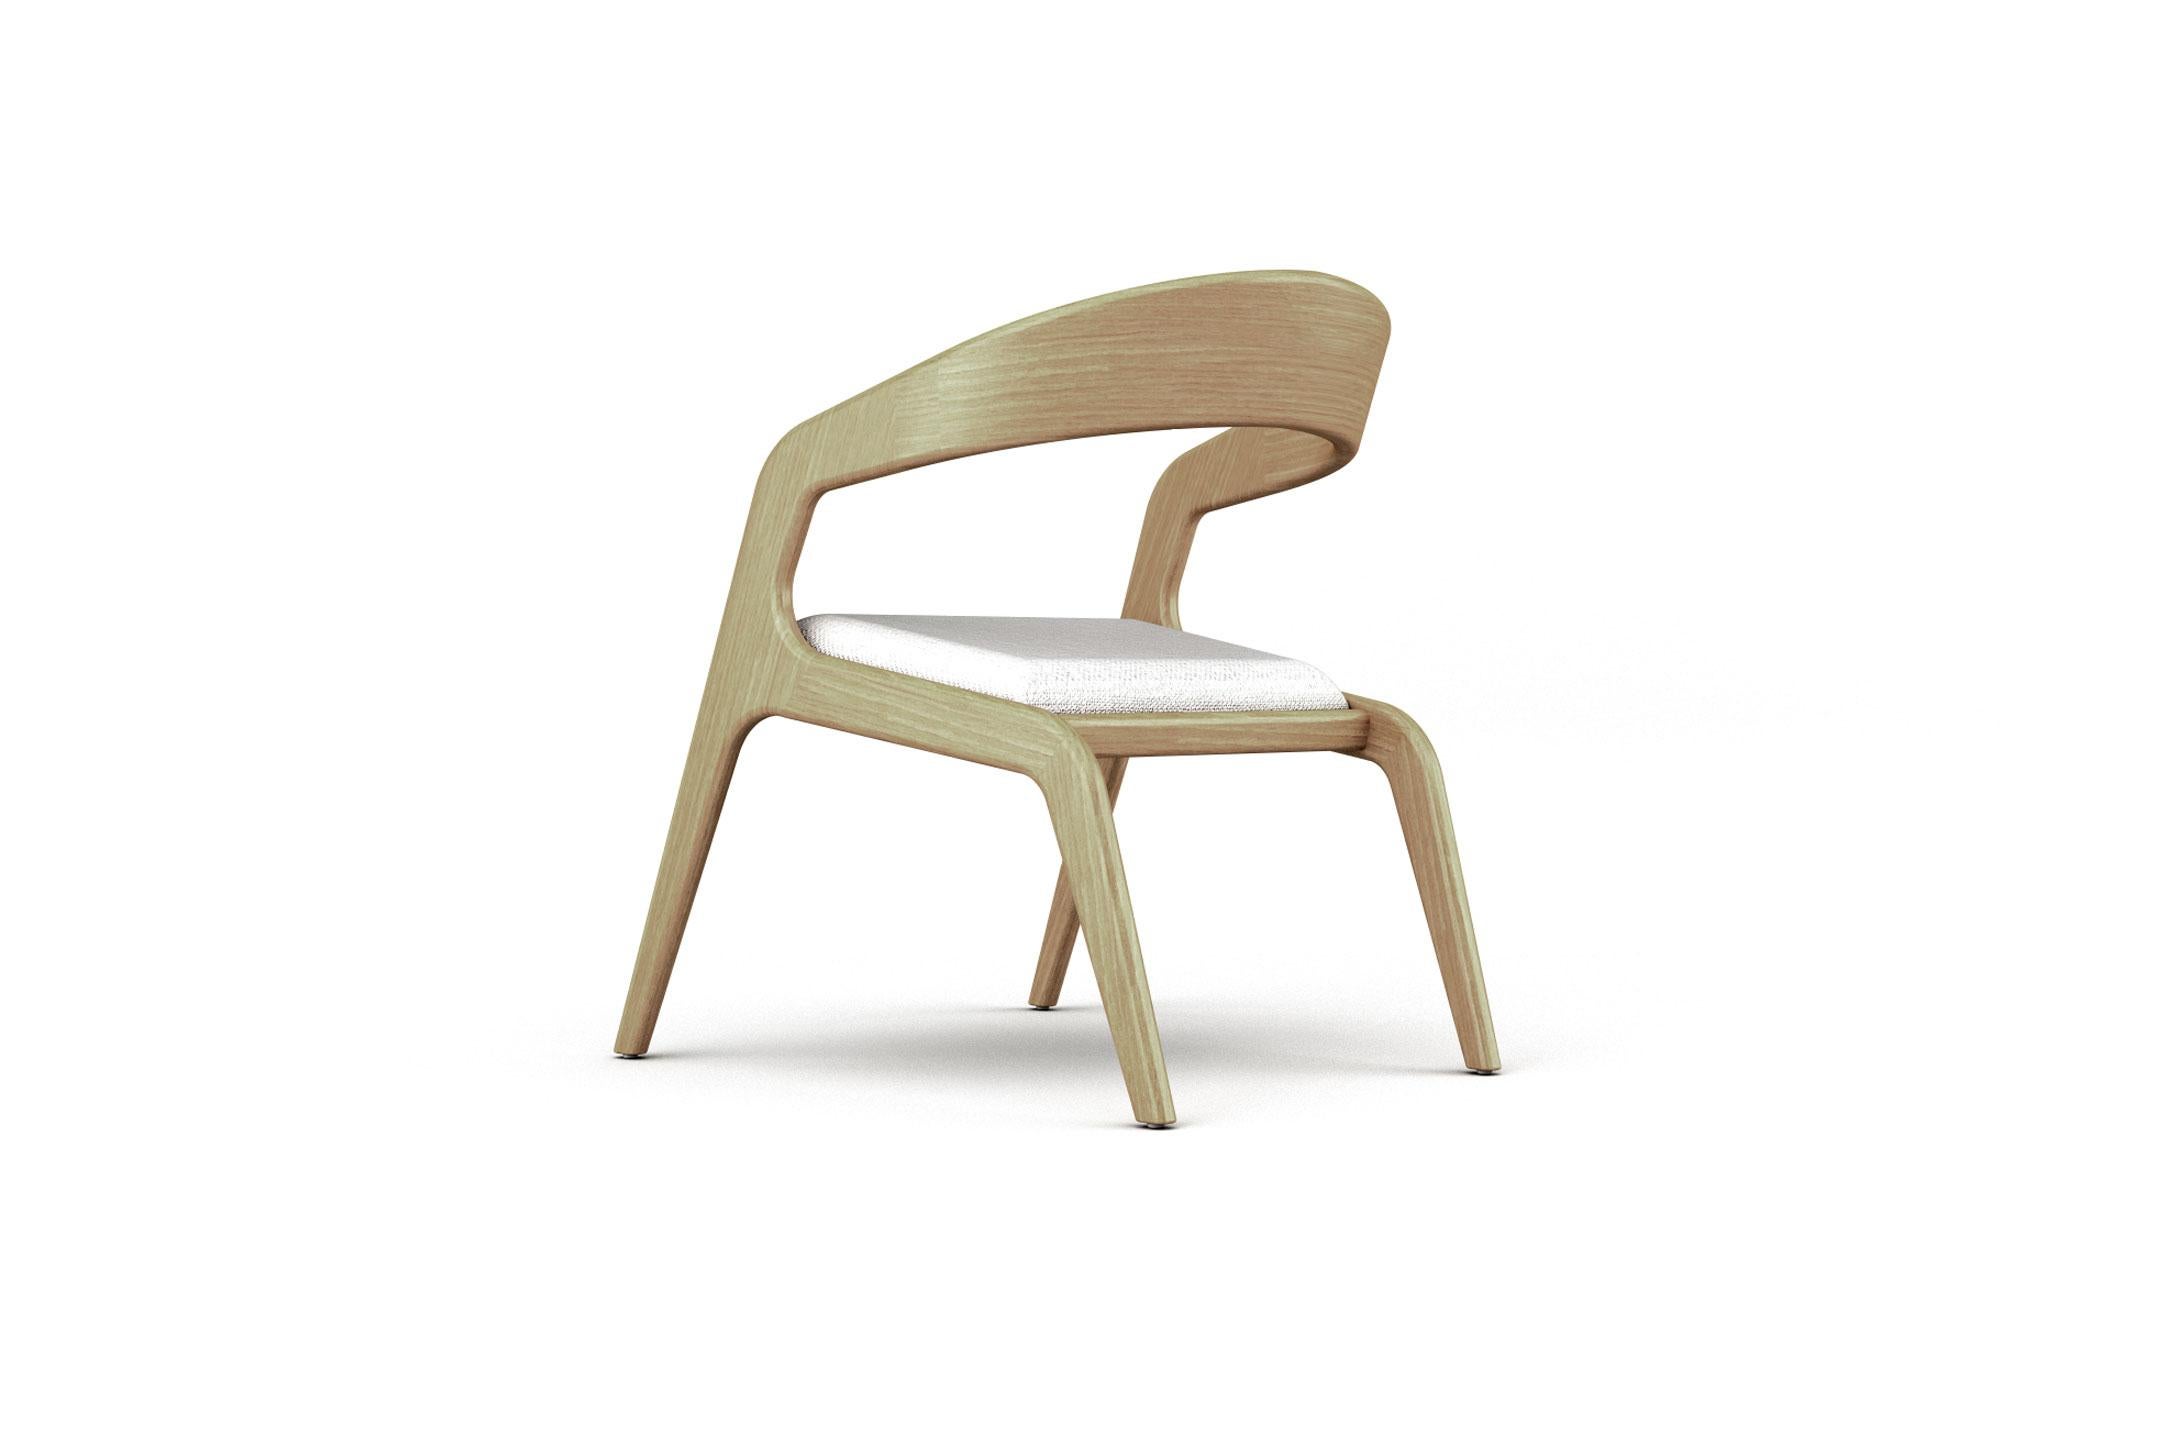 The Aura Armchair combines a minimalist and ethereal shape, in an eye-catching design. Its structure is shaped from curved solid wood with an upholstered seat which can be customized to order by our team of experienced craftsmen. The piece was